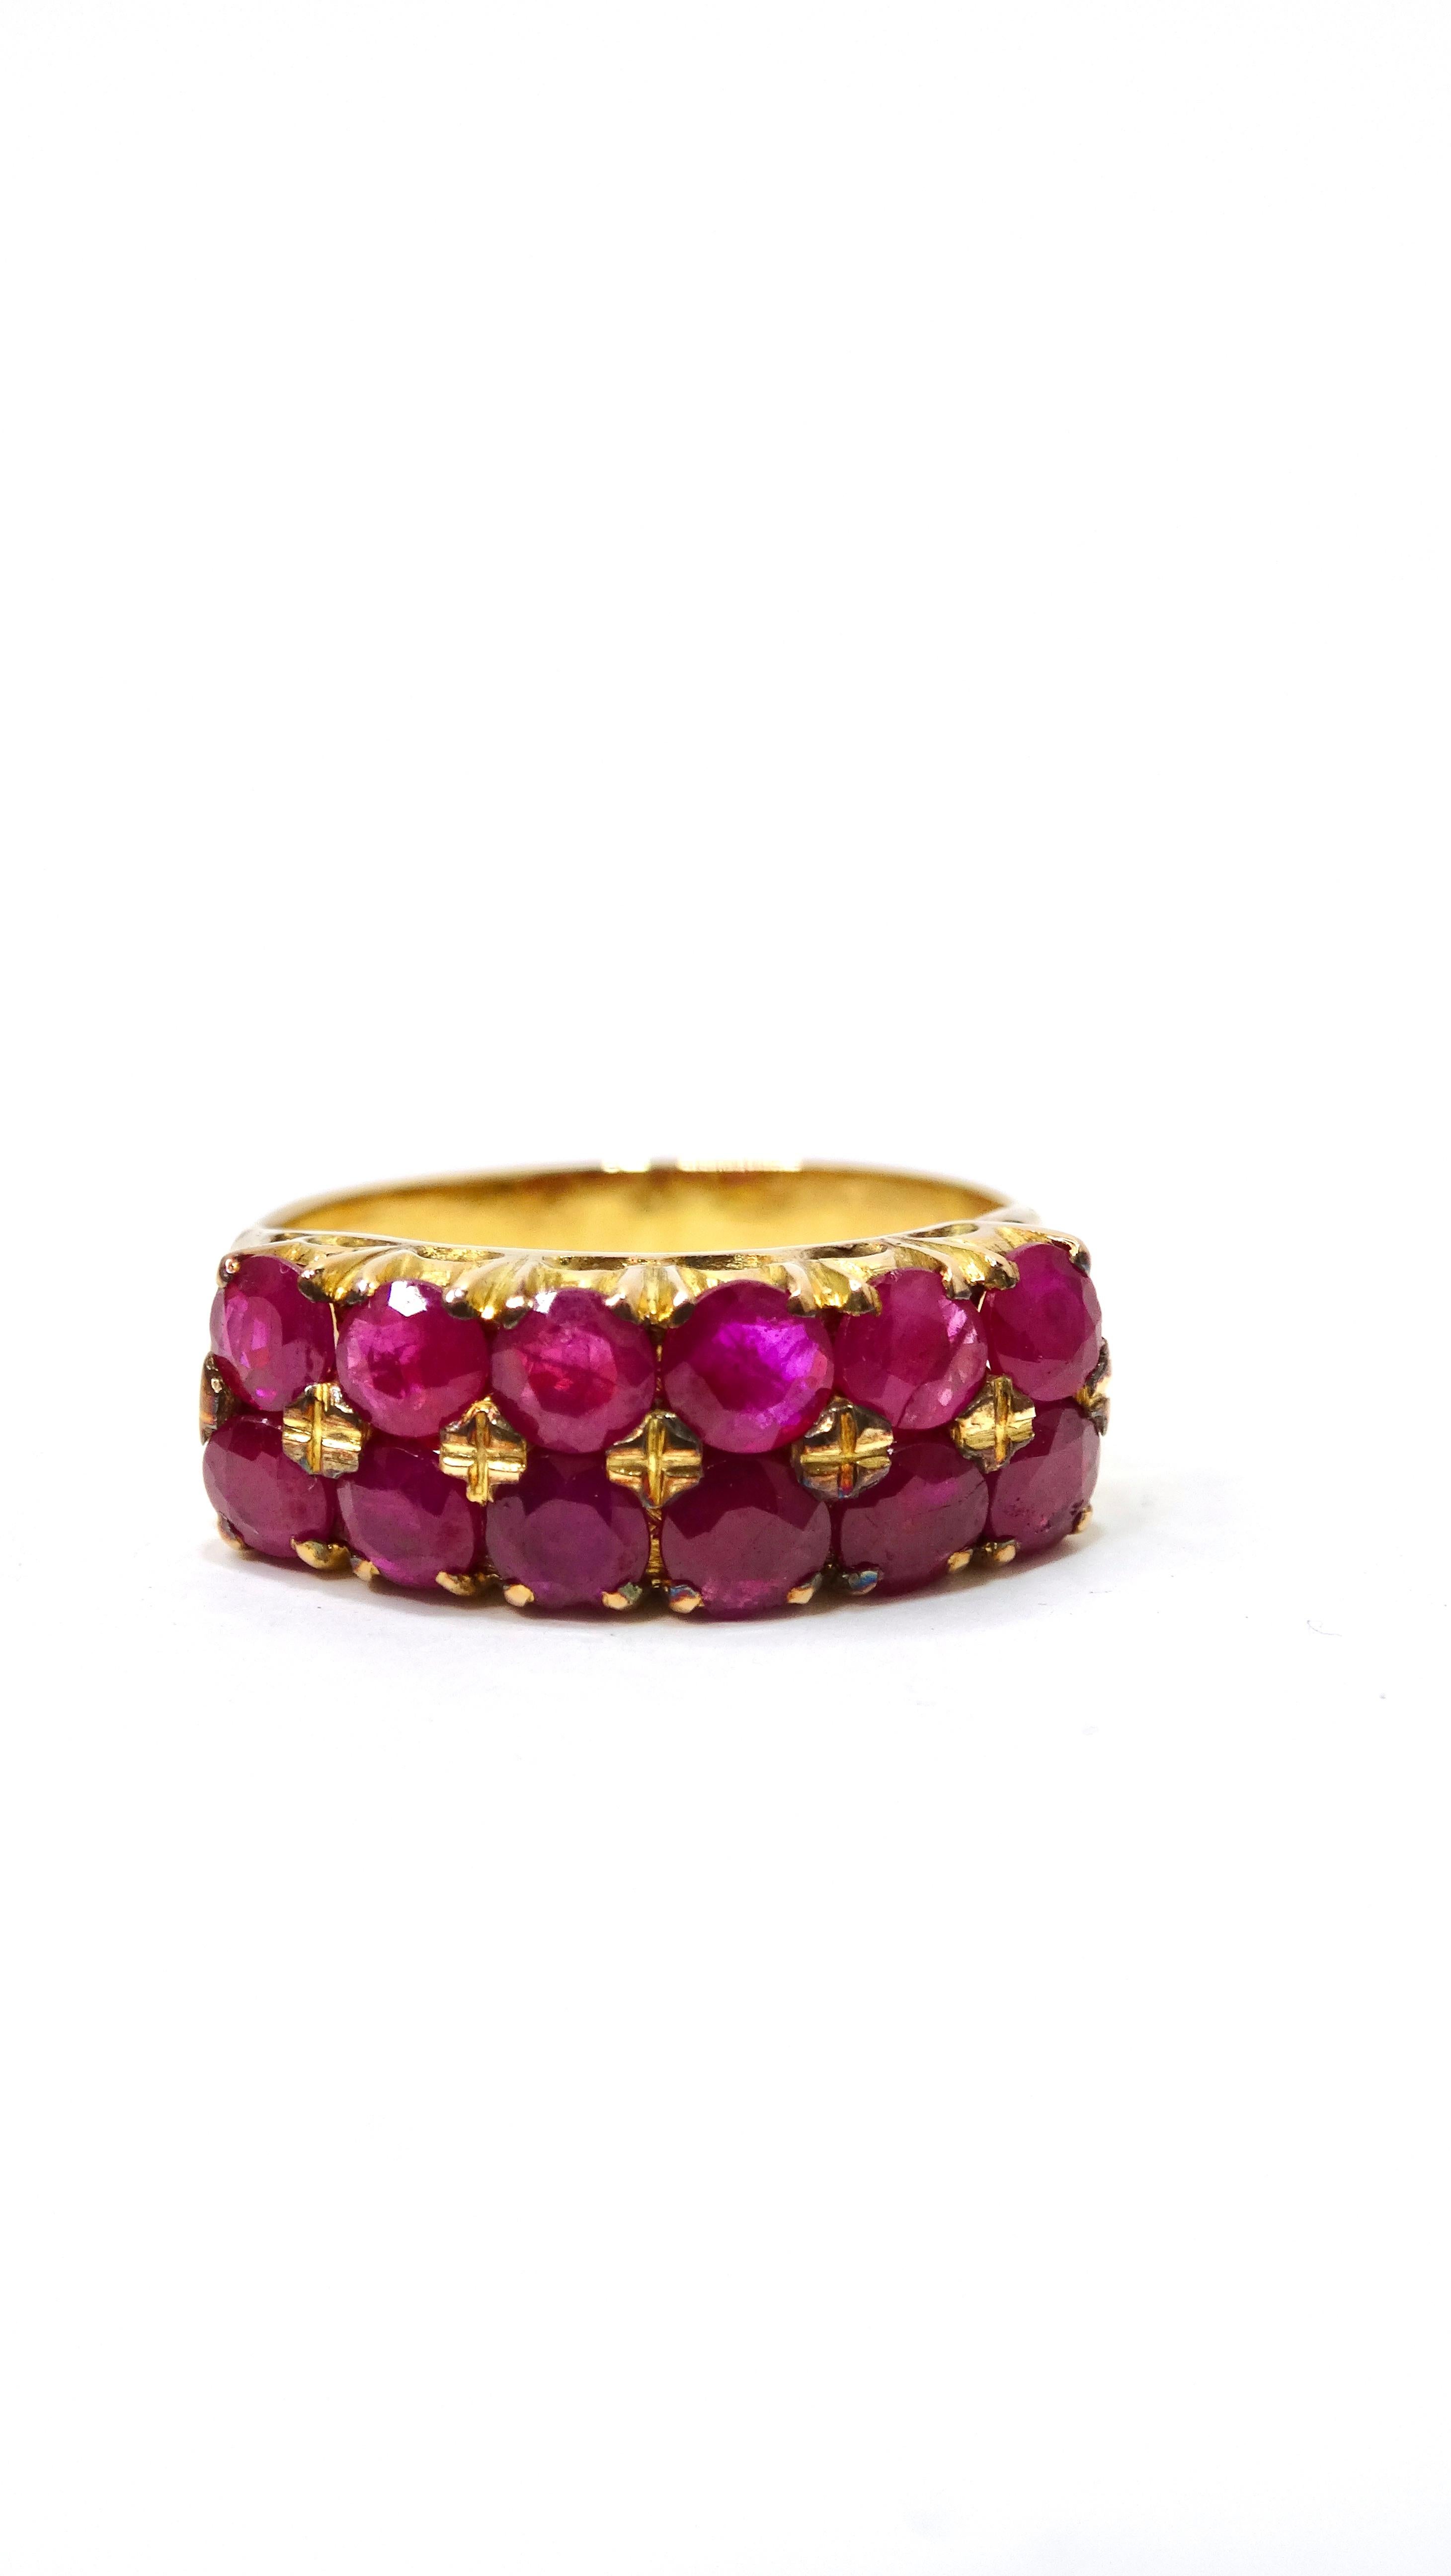 This ring is eye-candy! The sparkle and detail will have you drooling. There is something so effortless about a clustered ring. This ring features a yellow 14k gold band that still has a bright and bold color with 12 ruby round-cut gems decorating